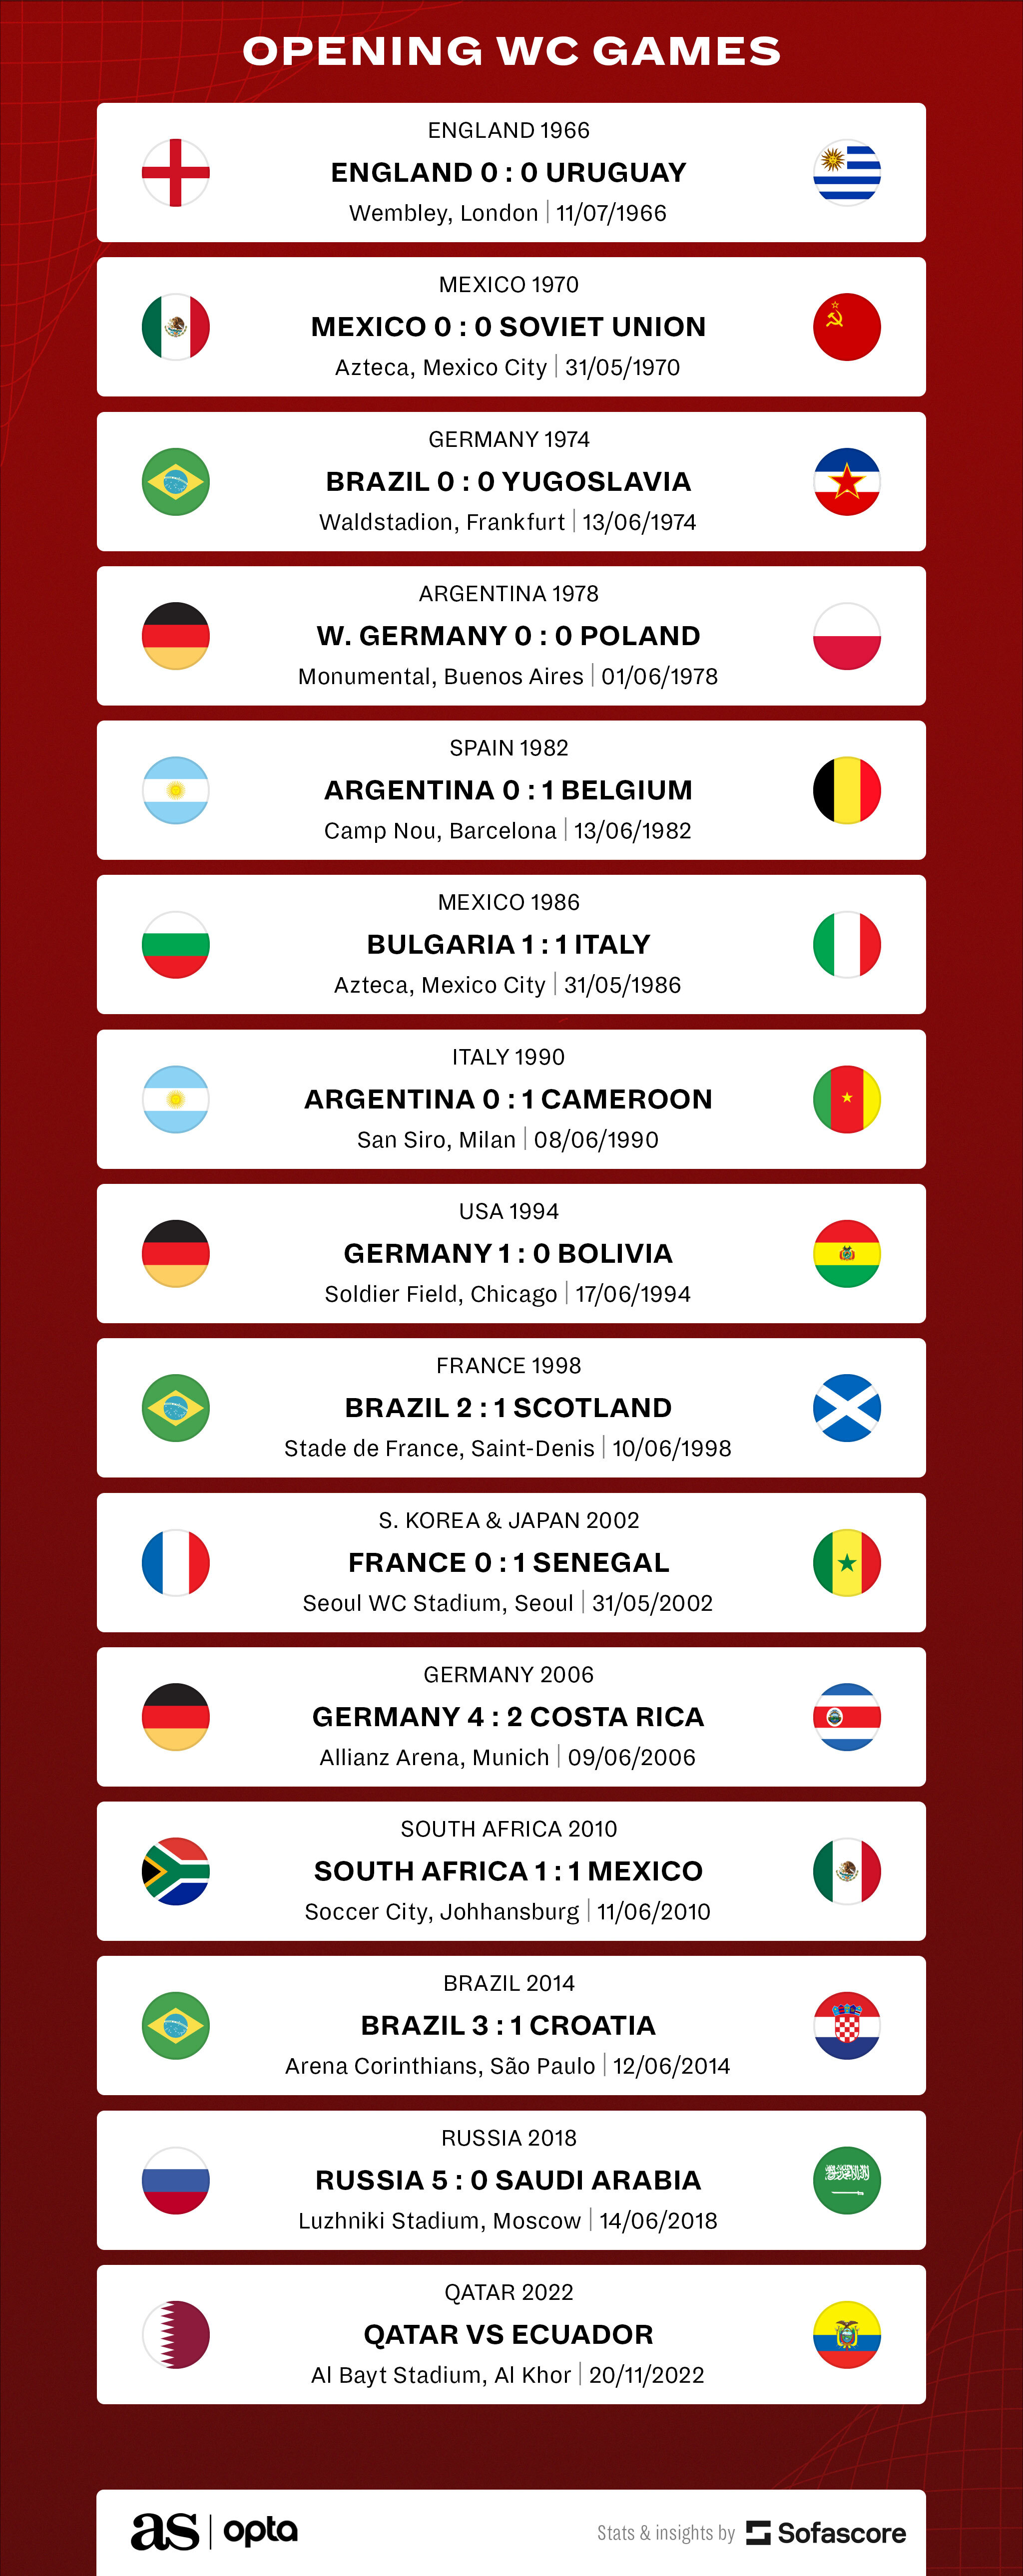 What are the results from World Cup opening games?